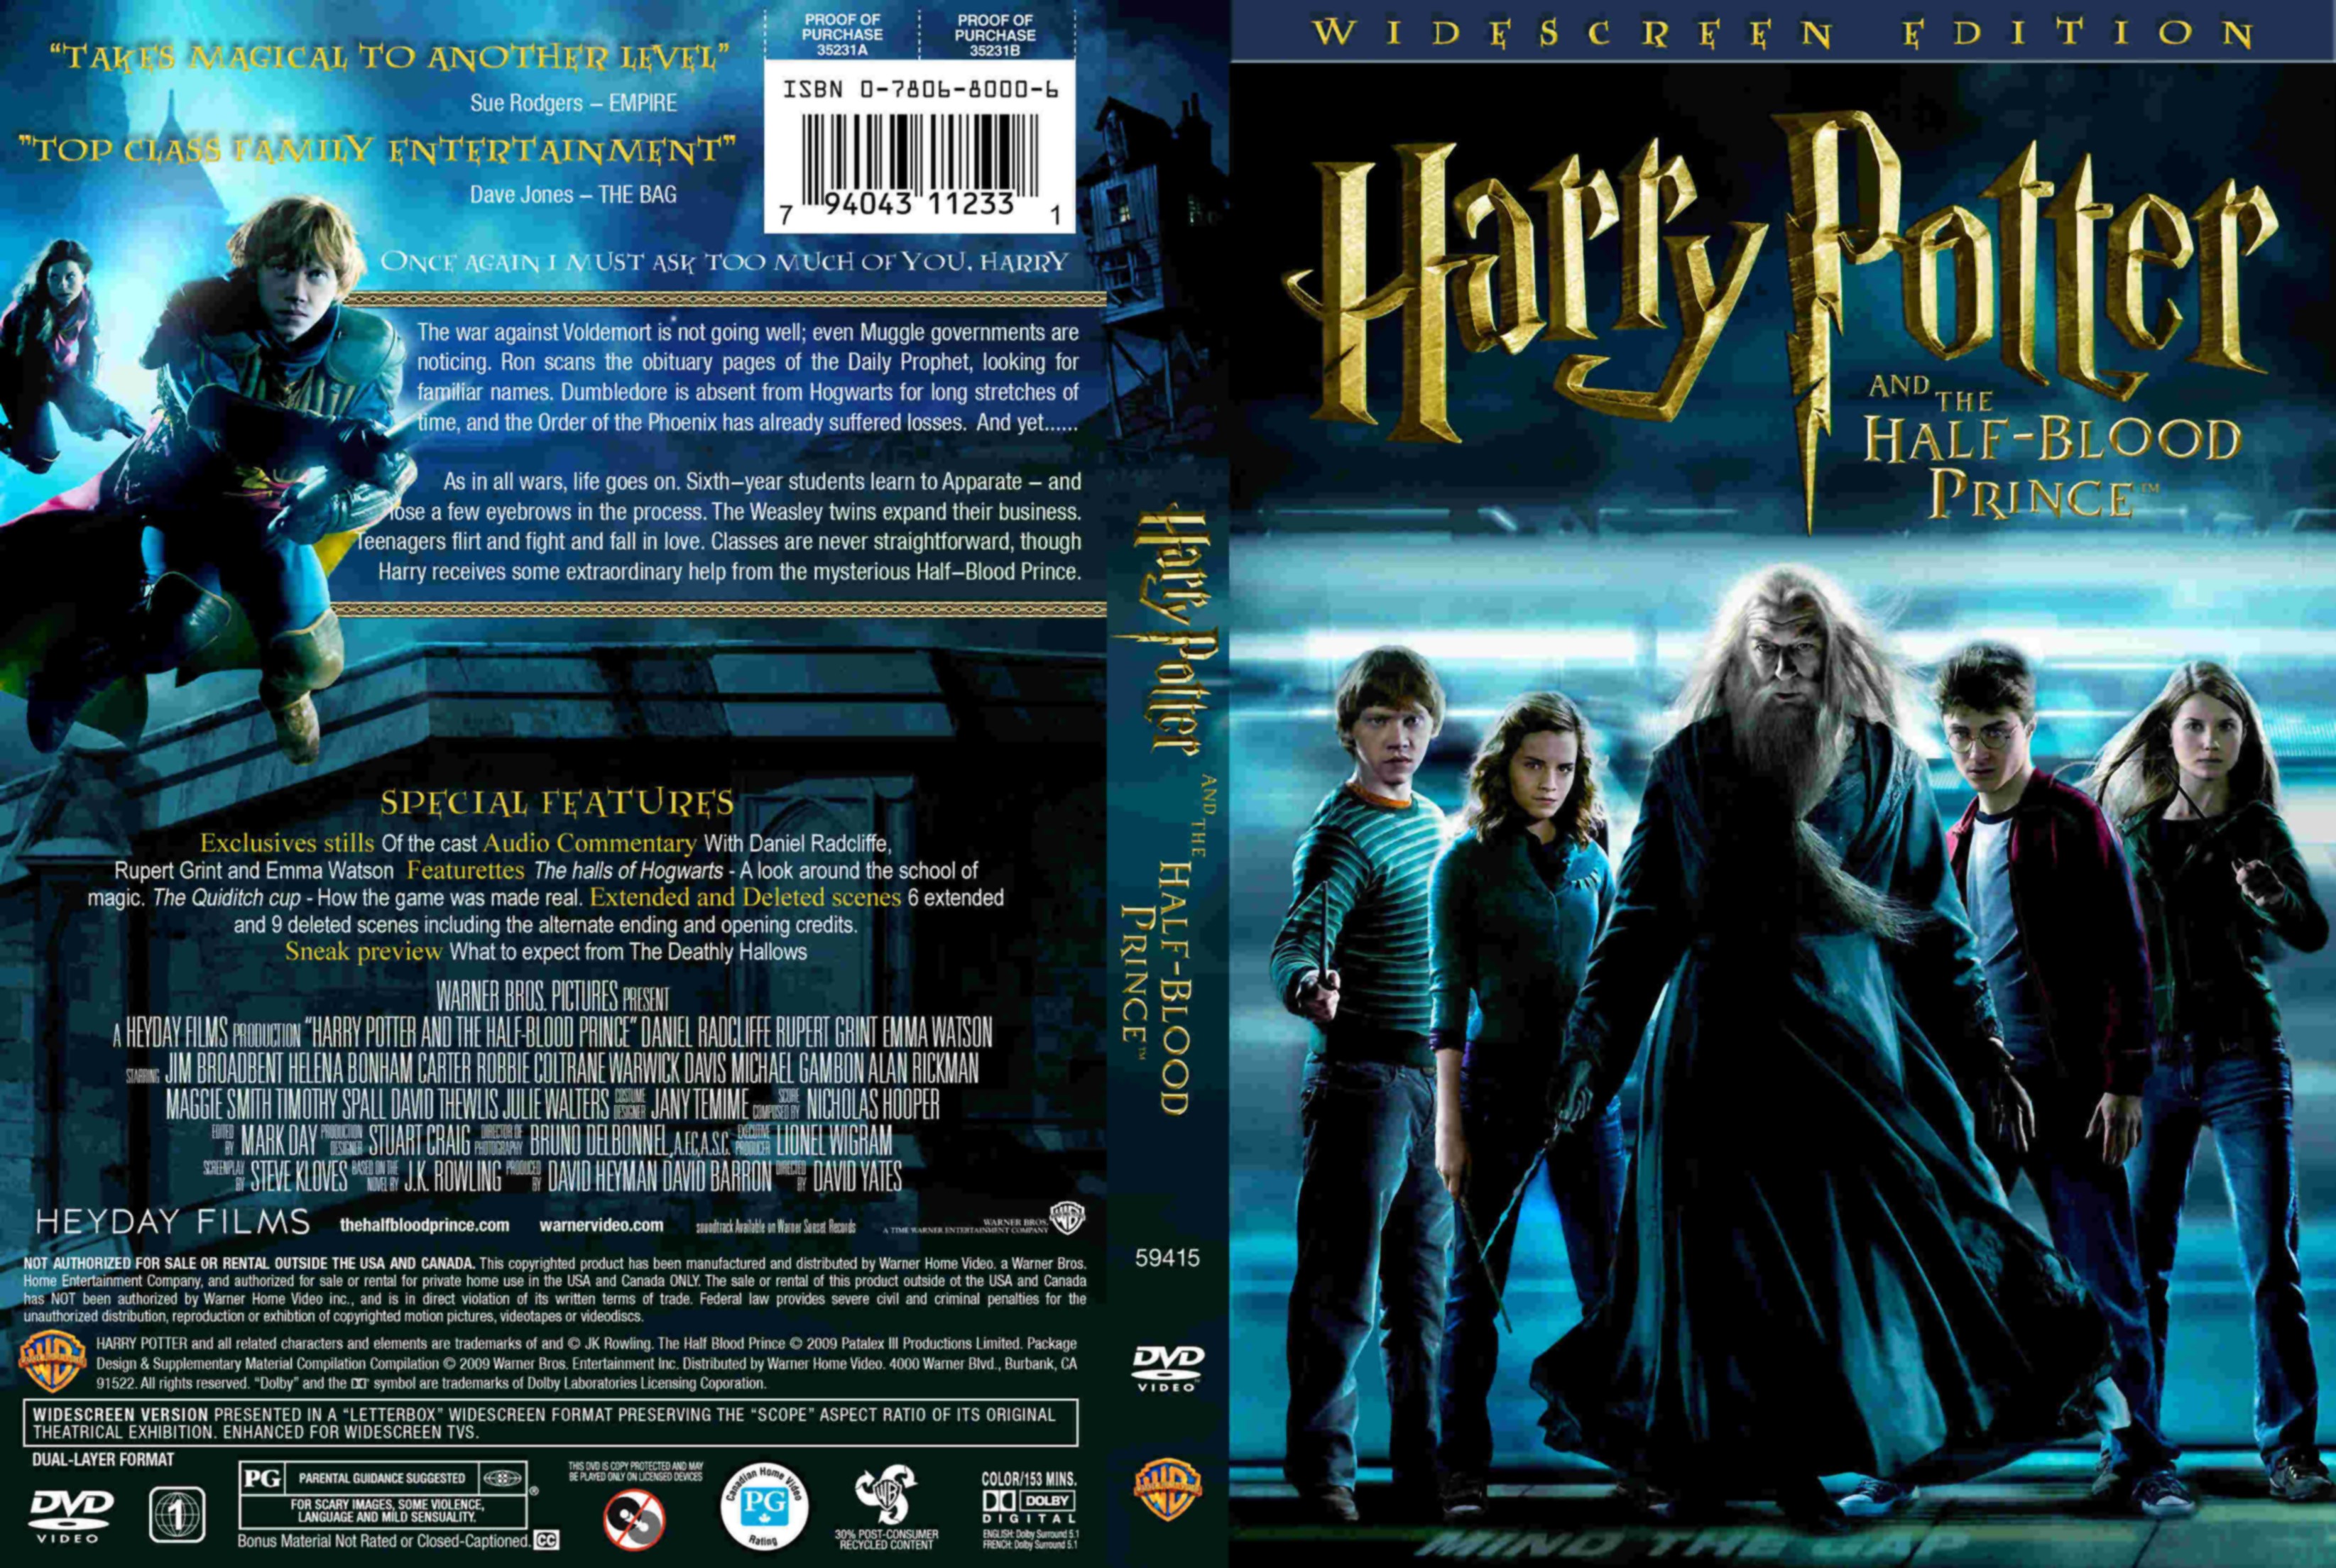 Book reports on harry potter the half blood prince